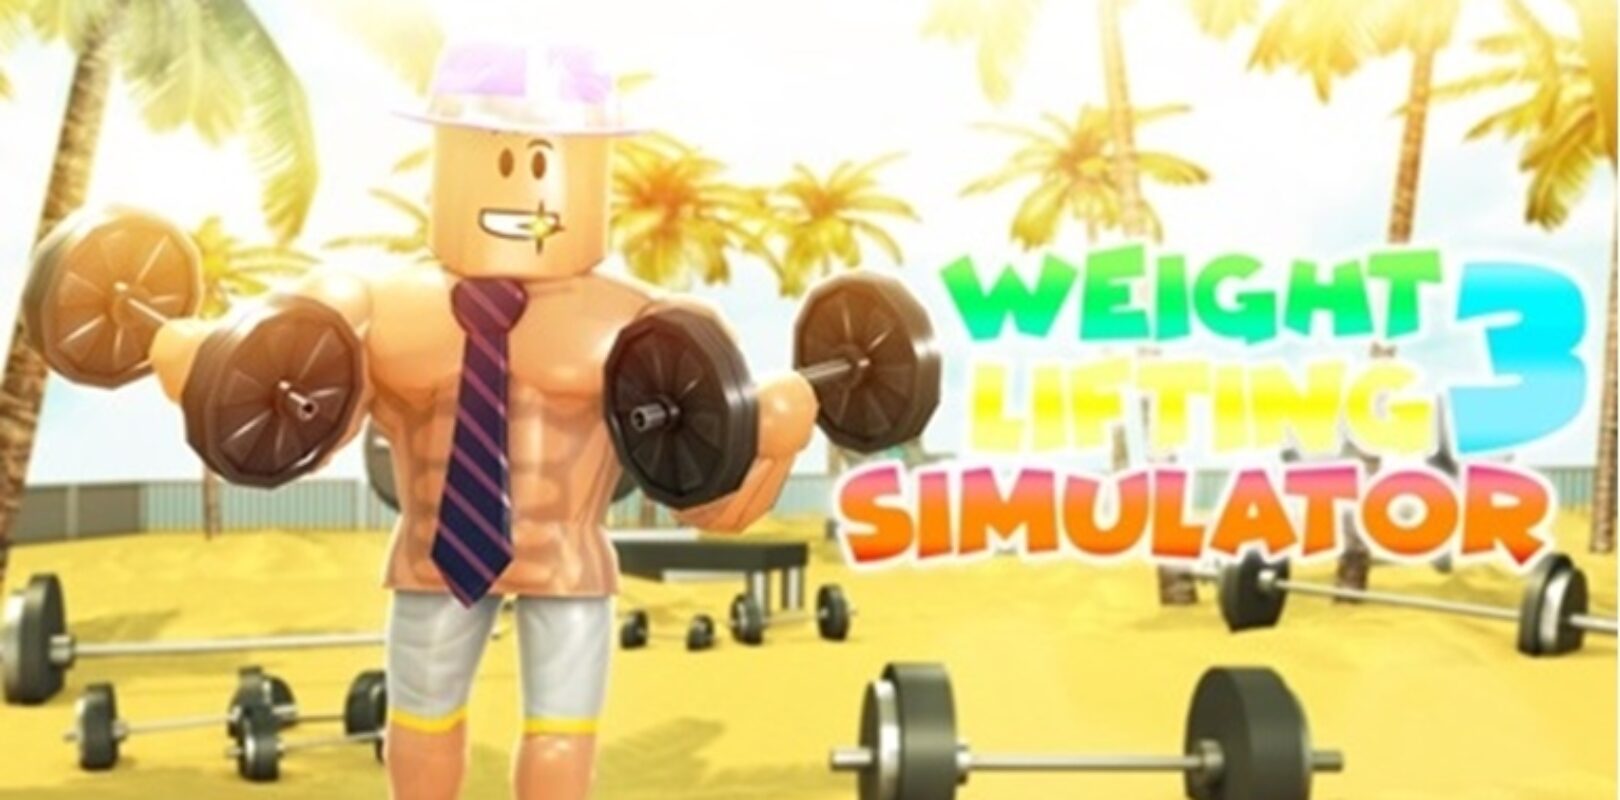 Weight Lifting Simulator 3 Codes 2020 Pivotal Gamers - 7 new codes in weight lifting simulator 3 roblox